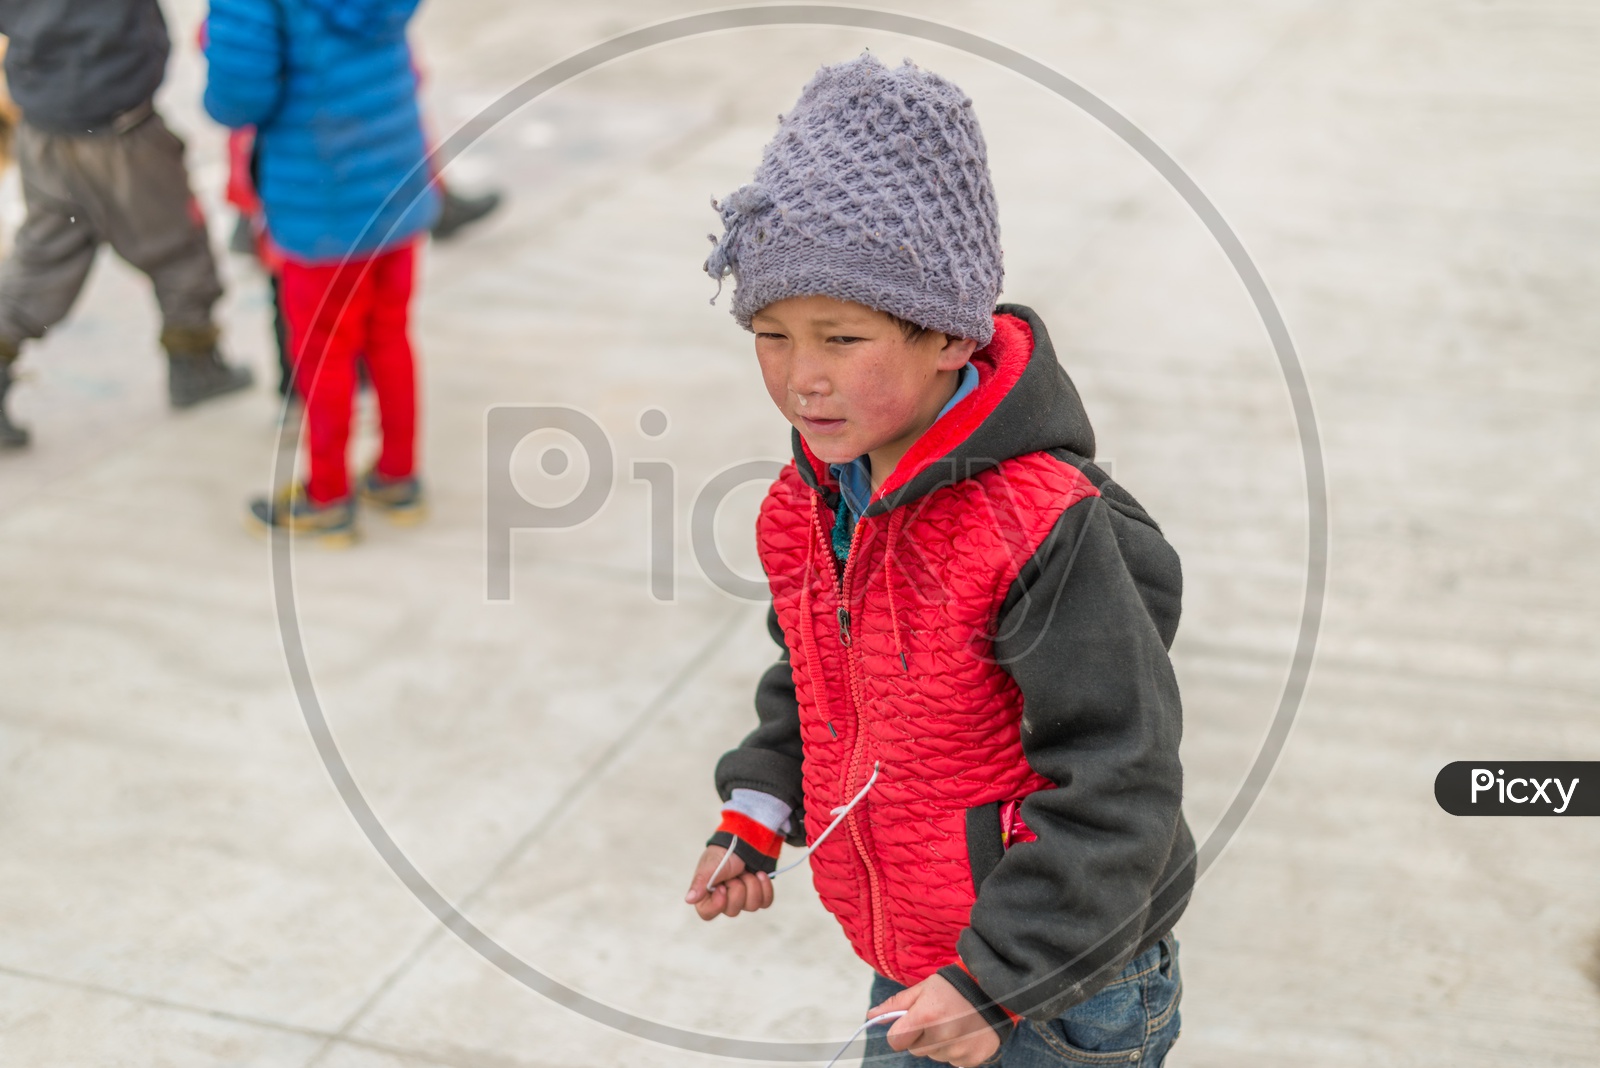 A Kid with Red Jerkin or Jacket in Winter at Monastery playing